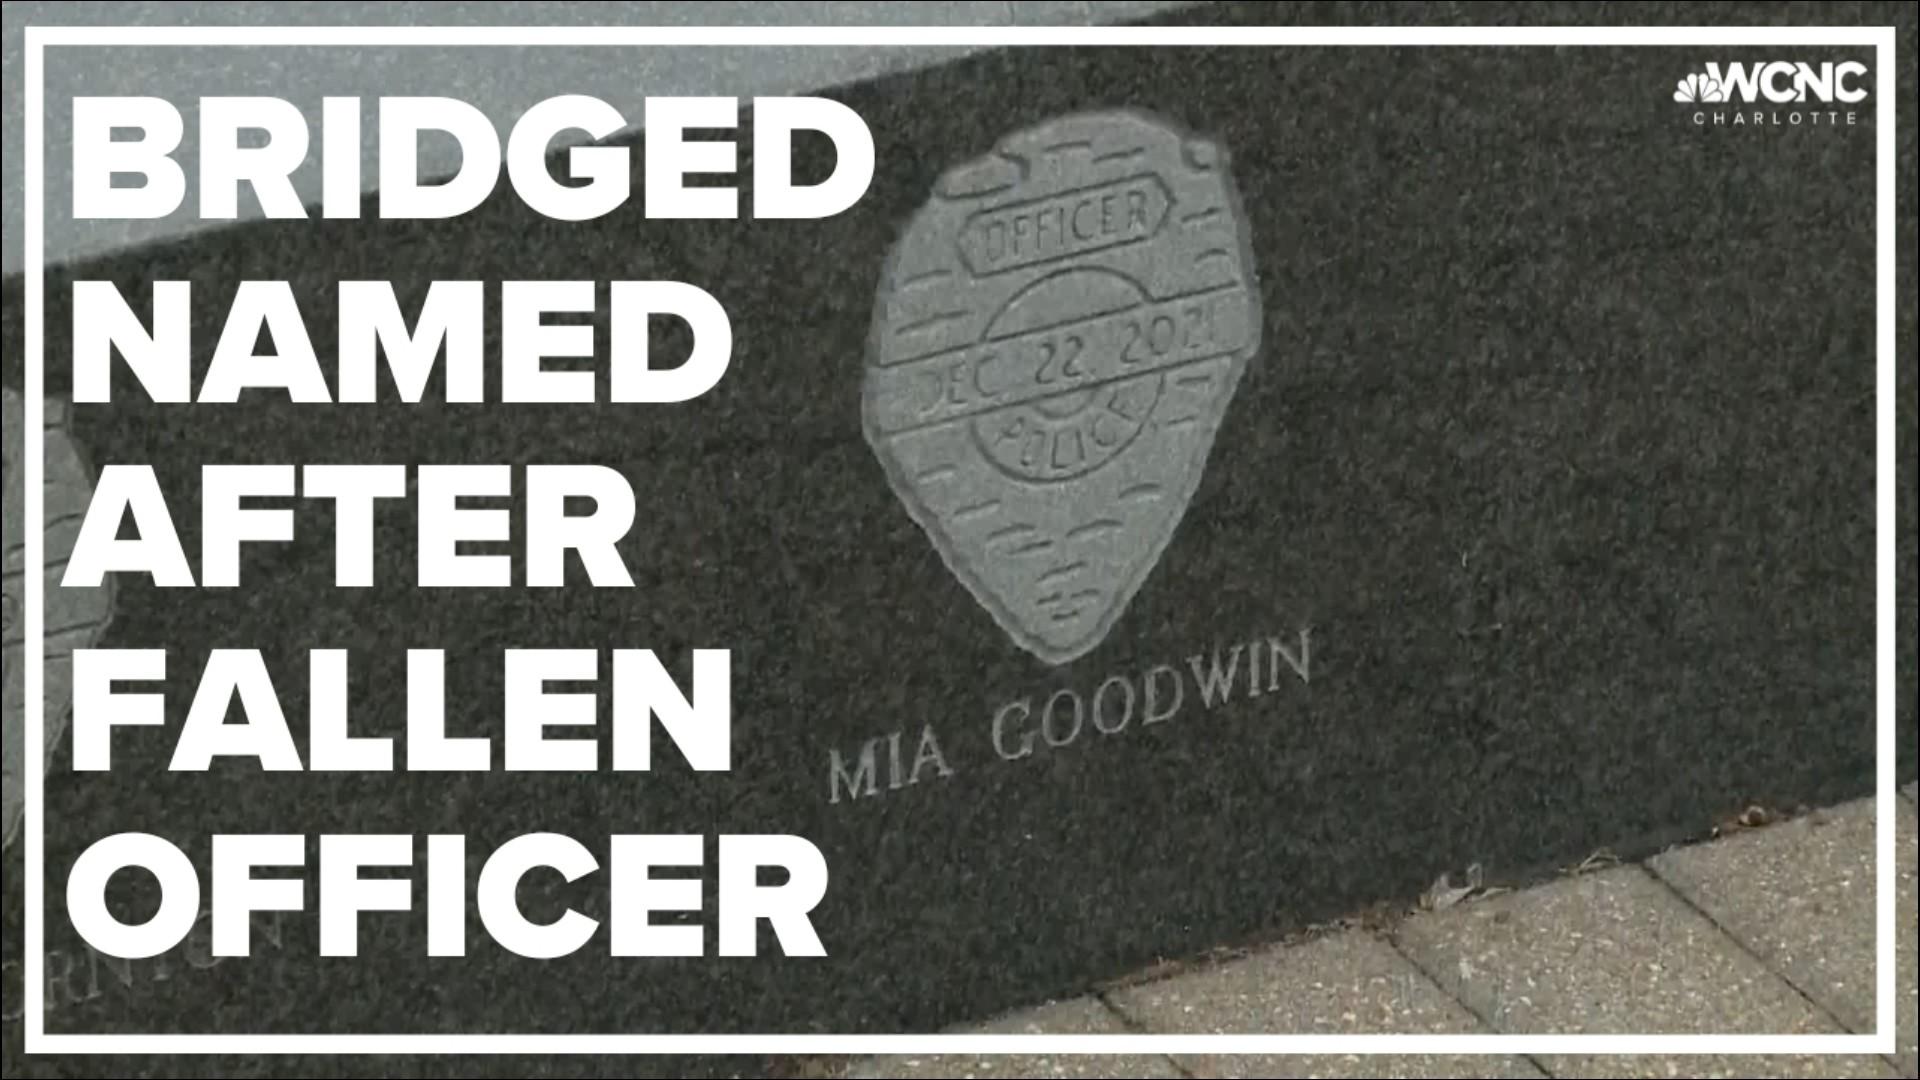 An officer who died in a crash will have a bridge named in her honor less than a year after she passed away.